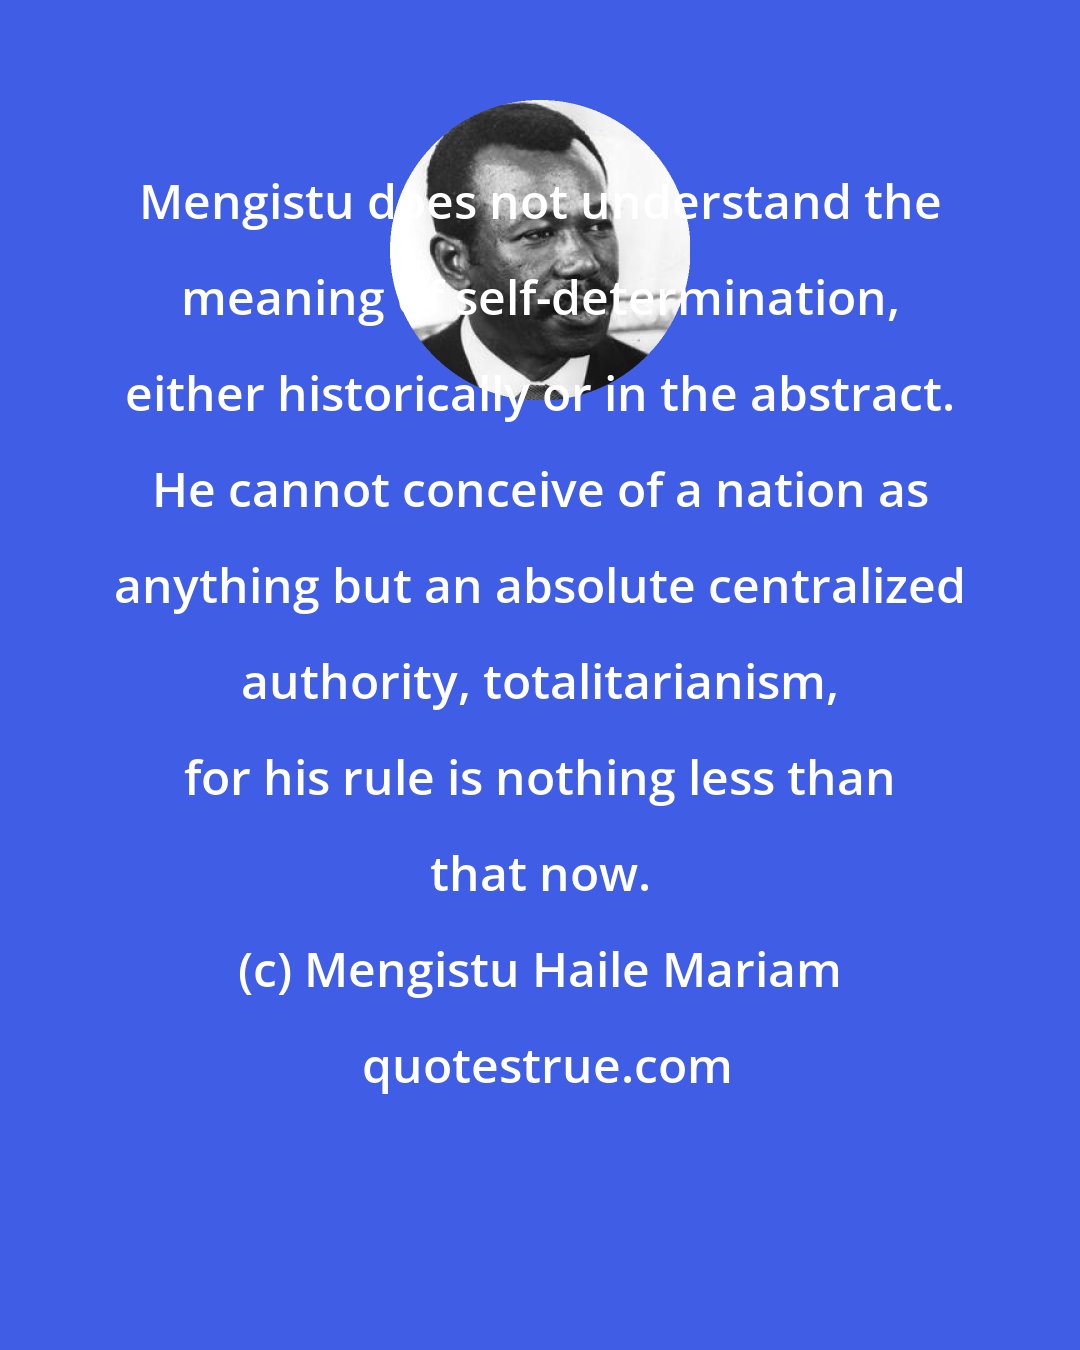 Mengistu Haile Mariam: Mengistu does not understand the meaning of self-determination, either historically or in the abstract. He cannot conceive of a nation as anything but an absolute centralized authority, totalitarianism, for his rule is nothing less than that now.